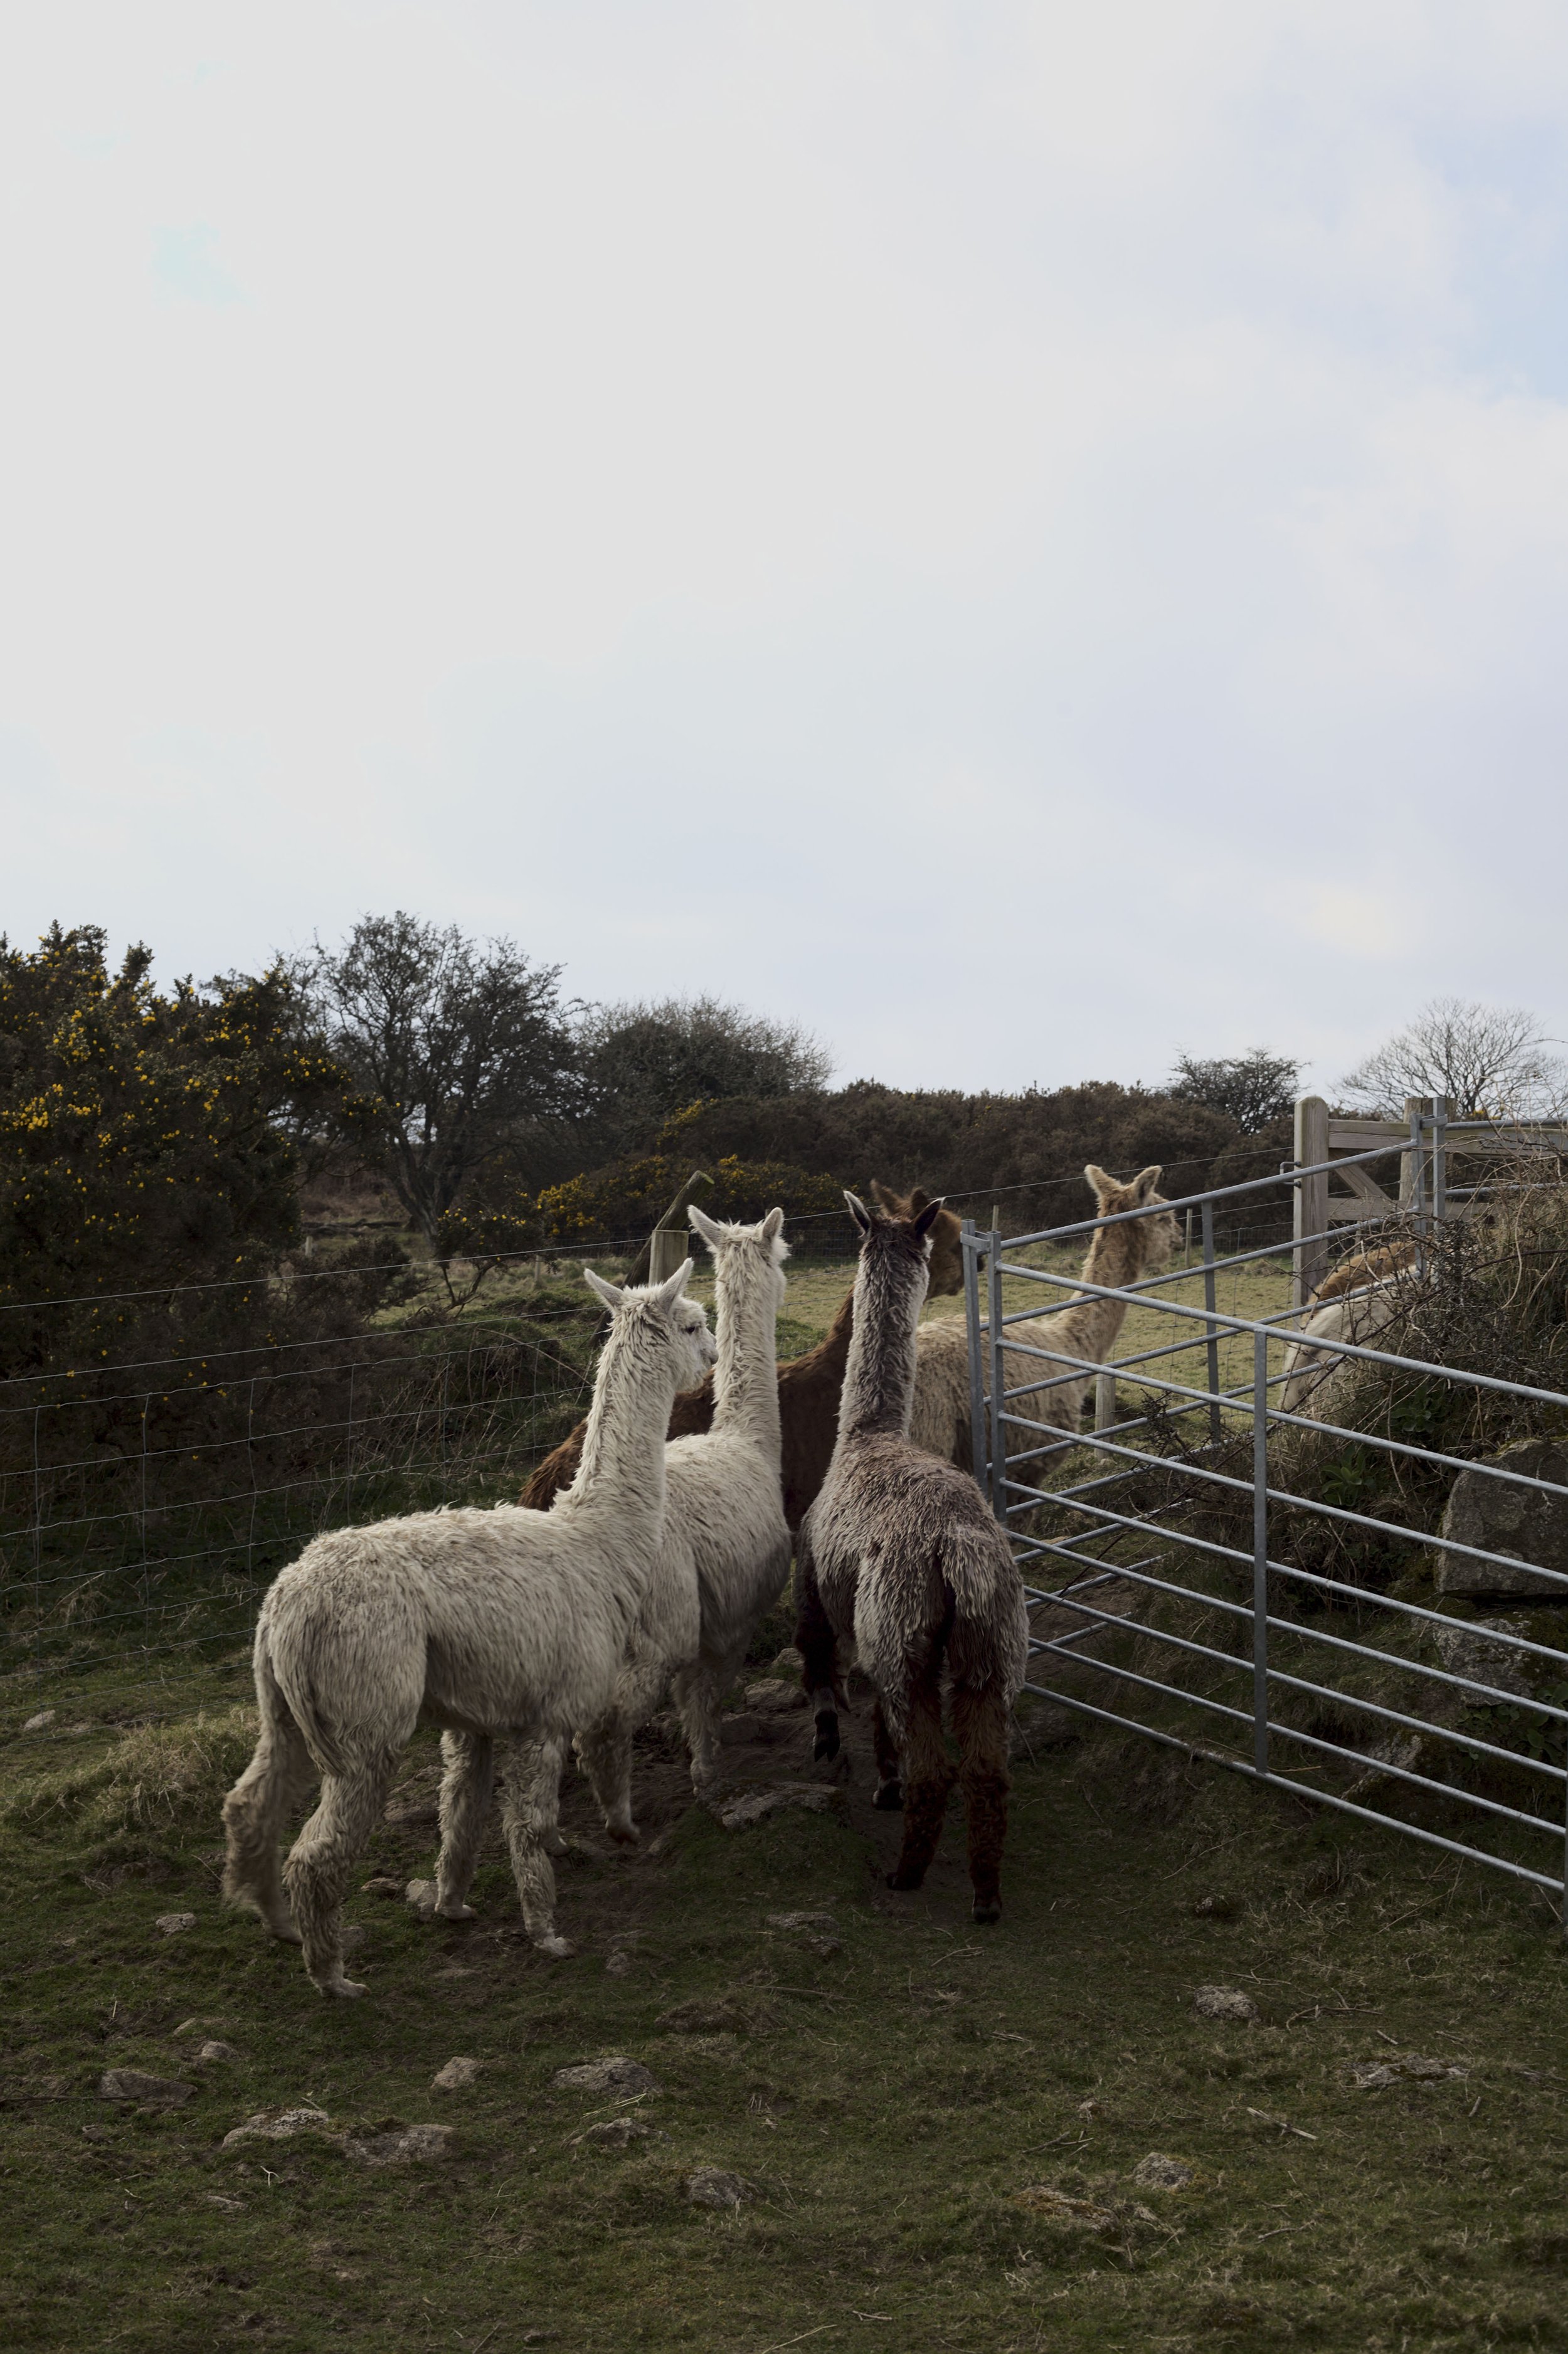  The herd going to pasture; alpaca have soft padded feet rather than hooves so they ‘poach’ the land far less—even in wet winters. 